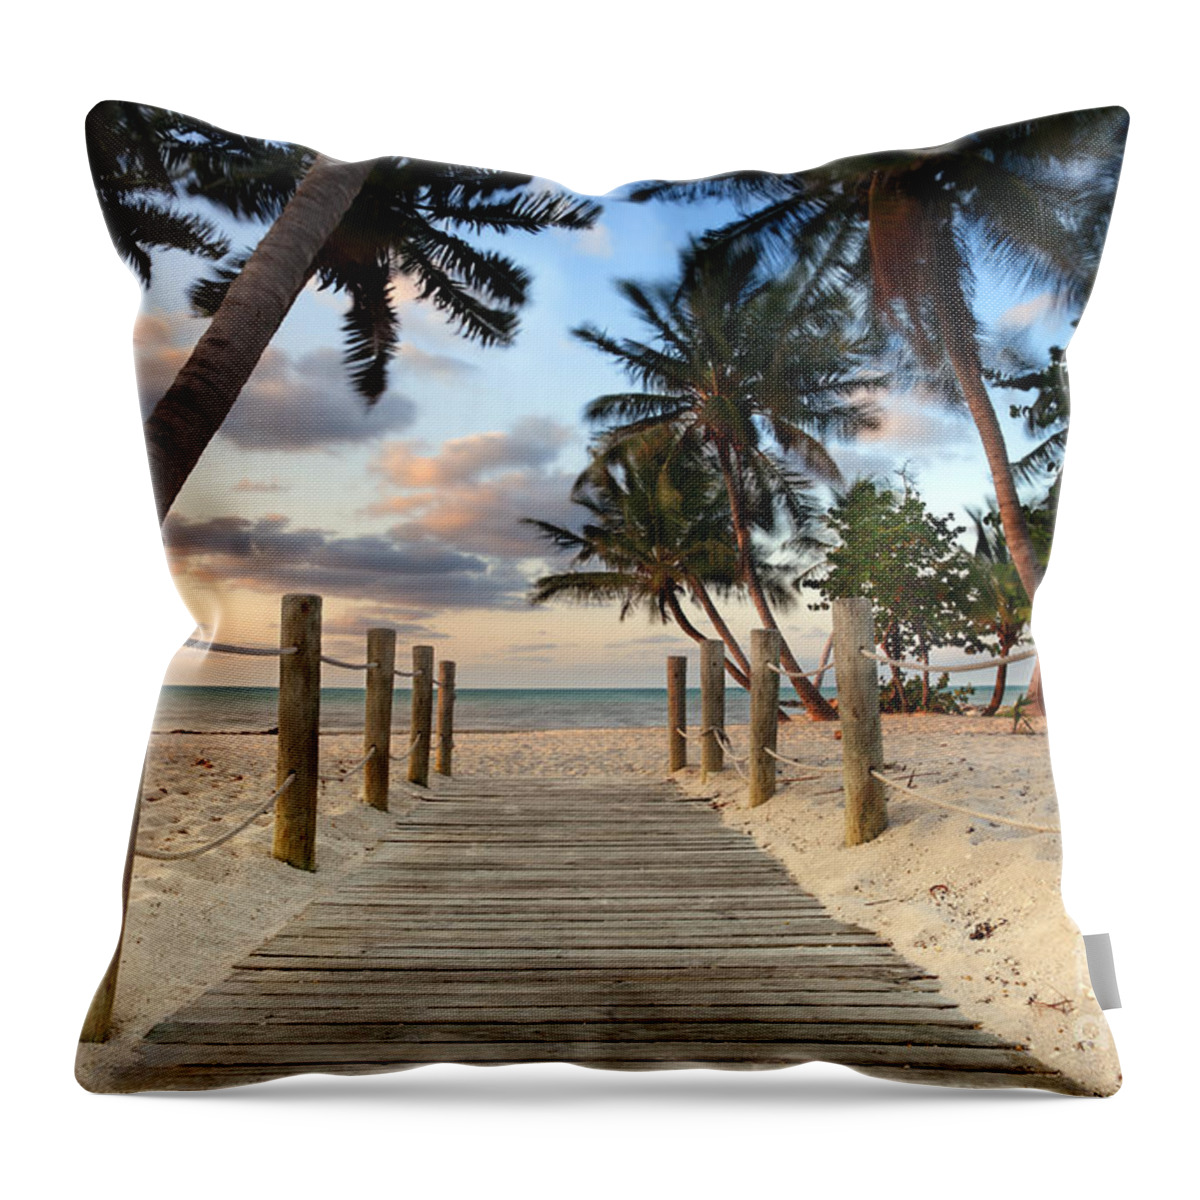 Smathers Beach Throw Pillow featuring the photograph Smathers Beach 2 by Rod McLean